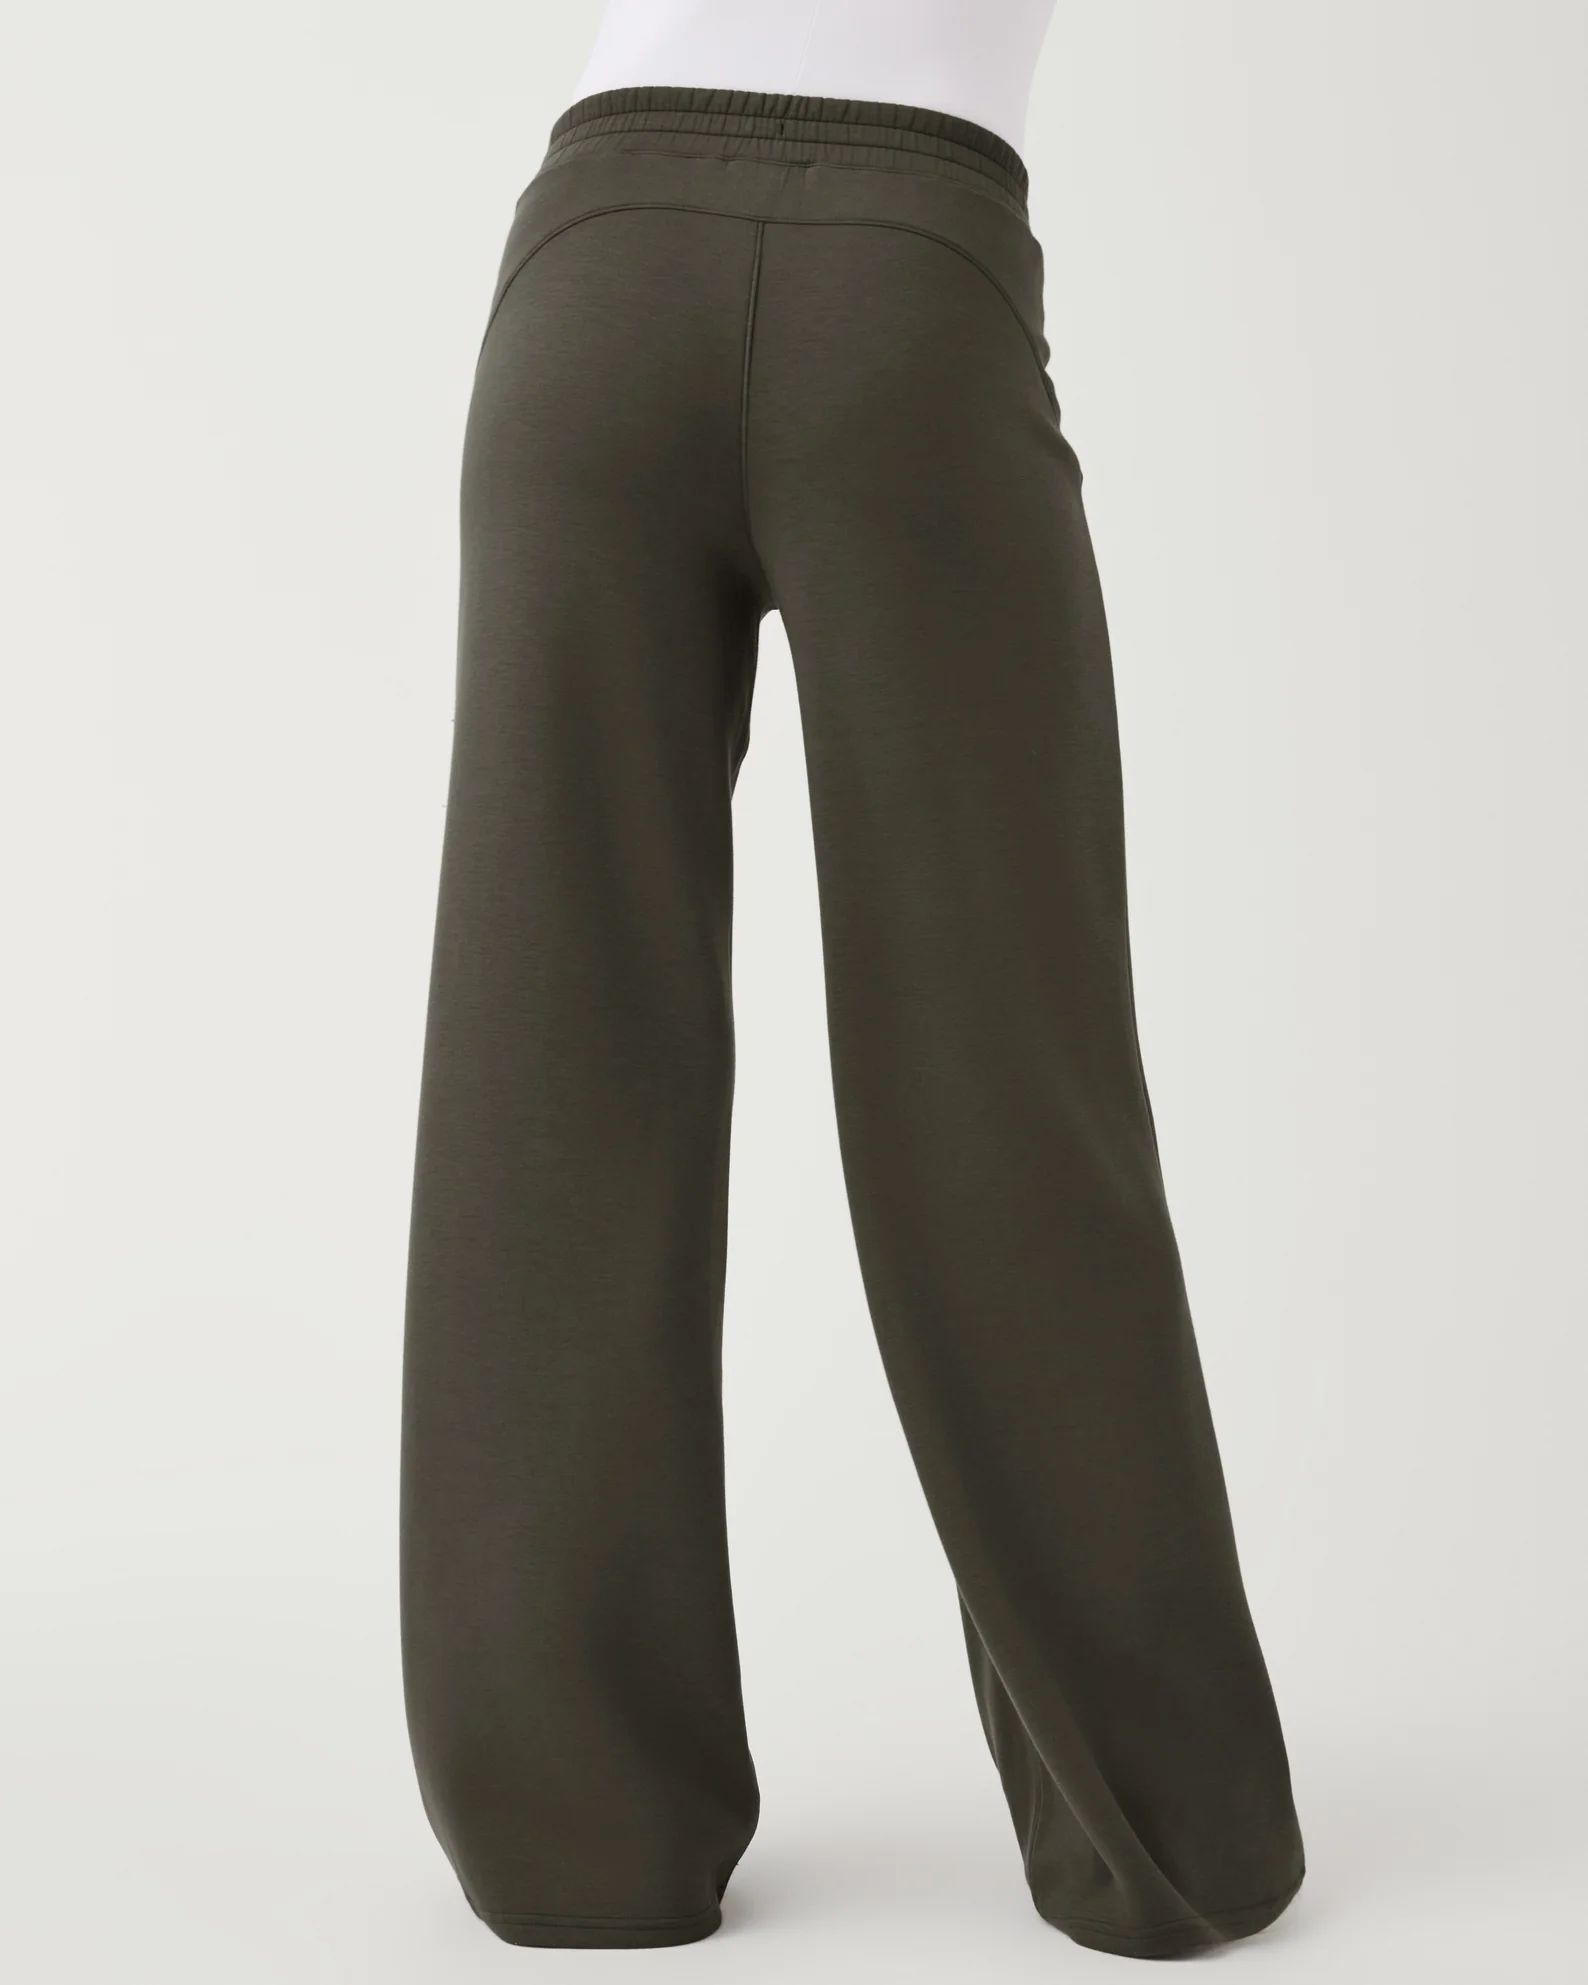 AirEssentials Wide Leg Pant | Spanx